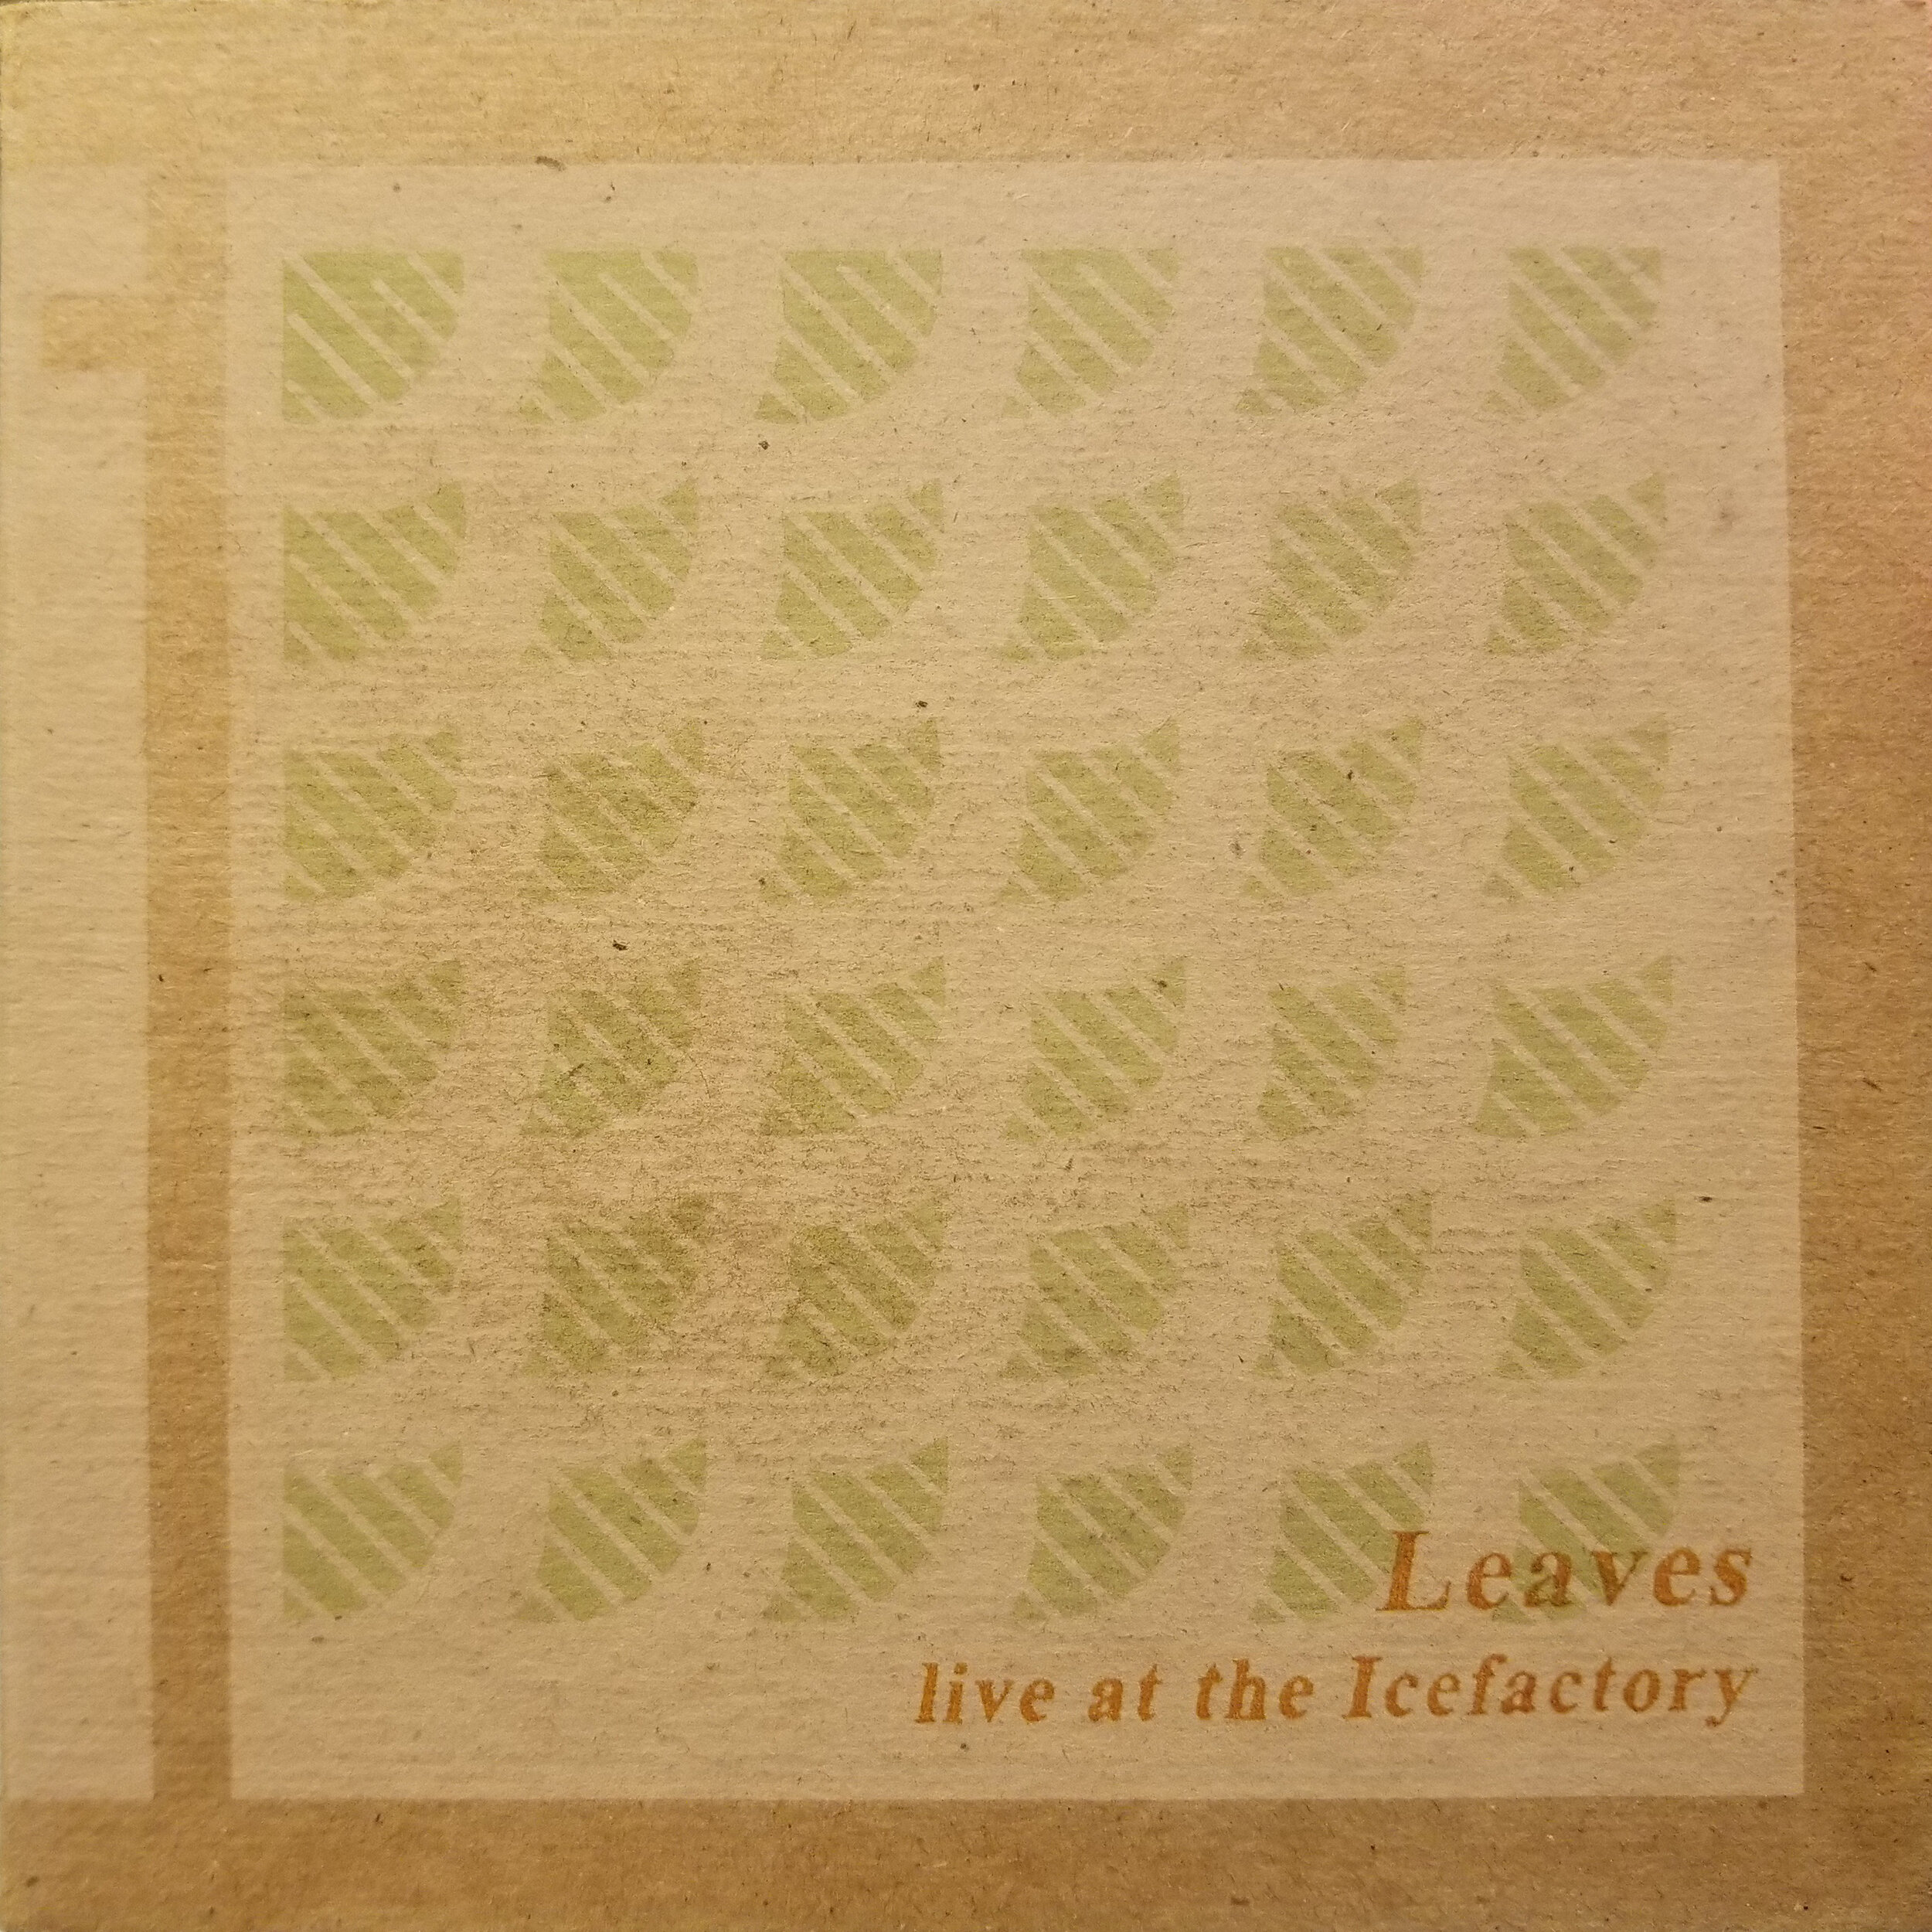 Leaves - Live at the Icefactory (2006)